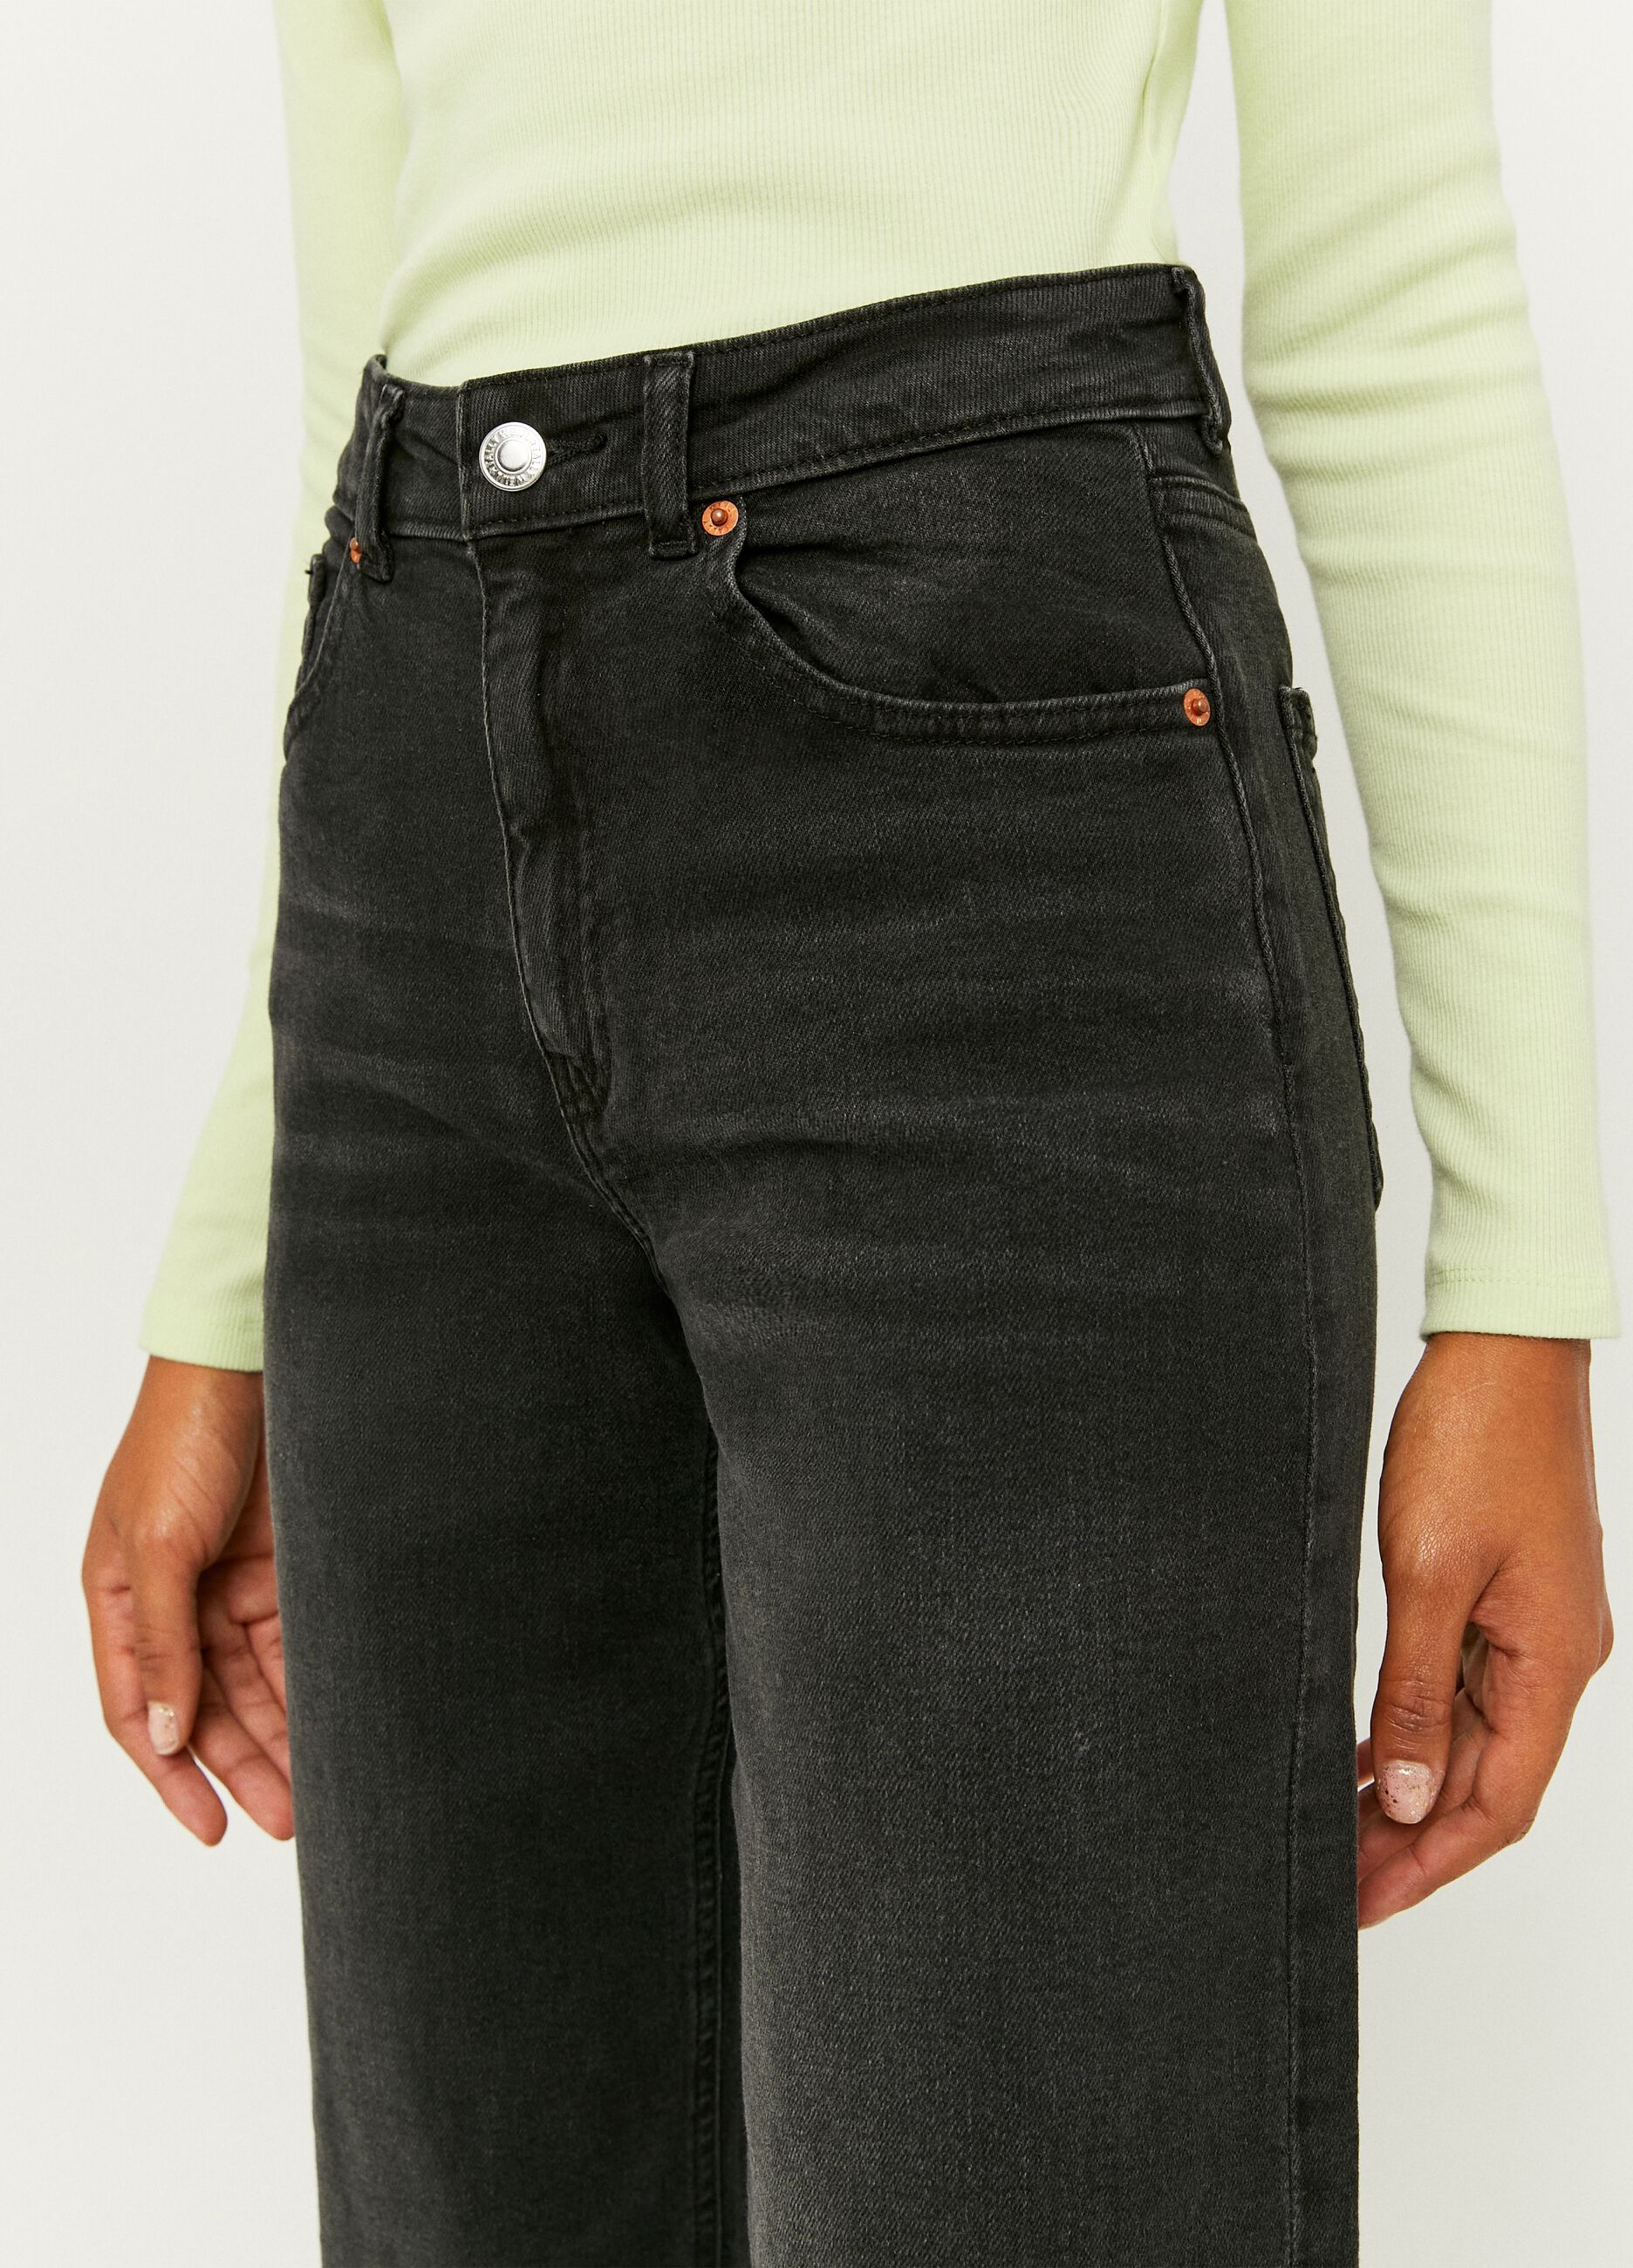 Wide jeans with high waist